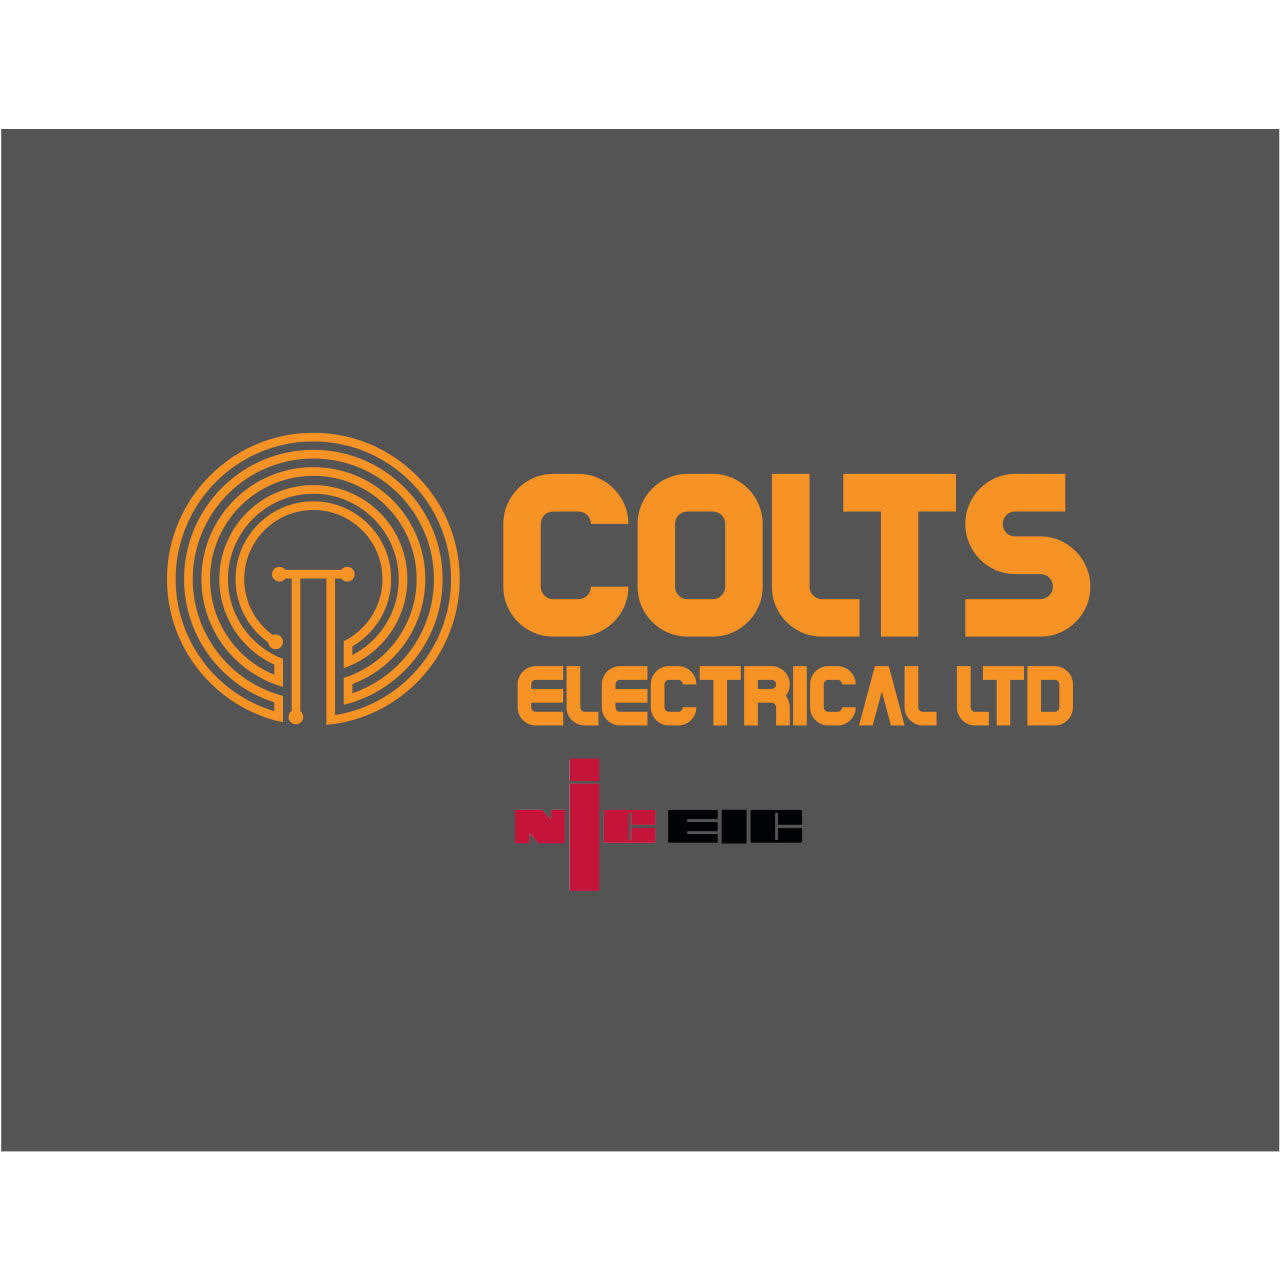 Colts Electrical Ltd - Stamford, Lincolnshire PE9 4BY - 07512 770413 | ShowMeLocal.com